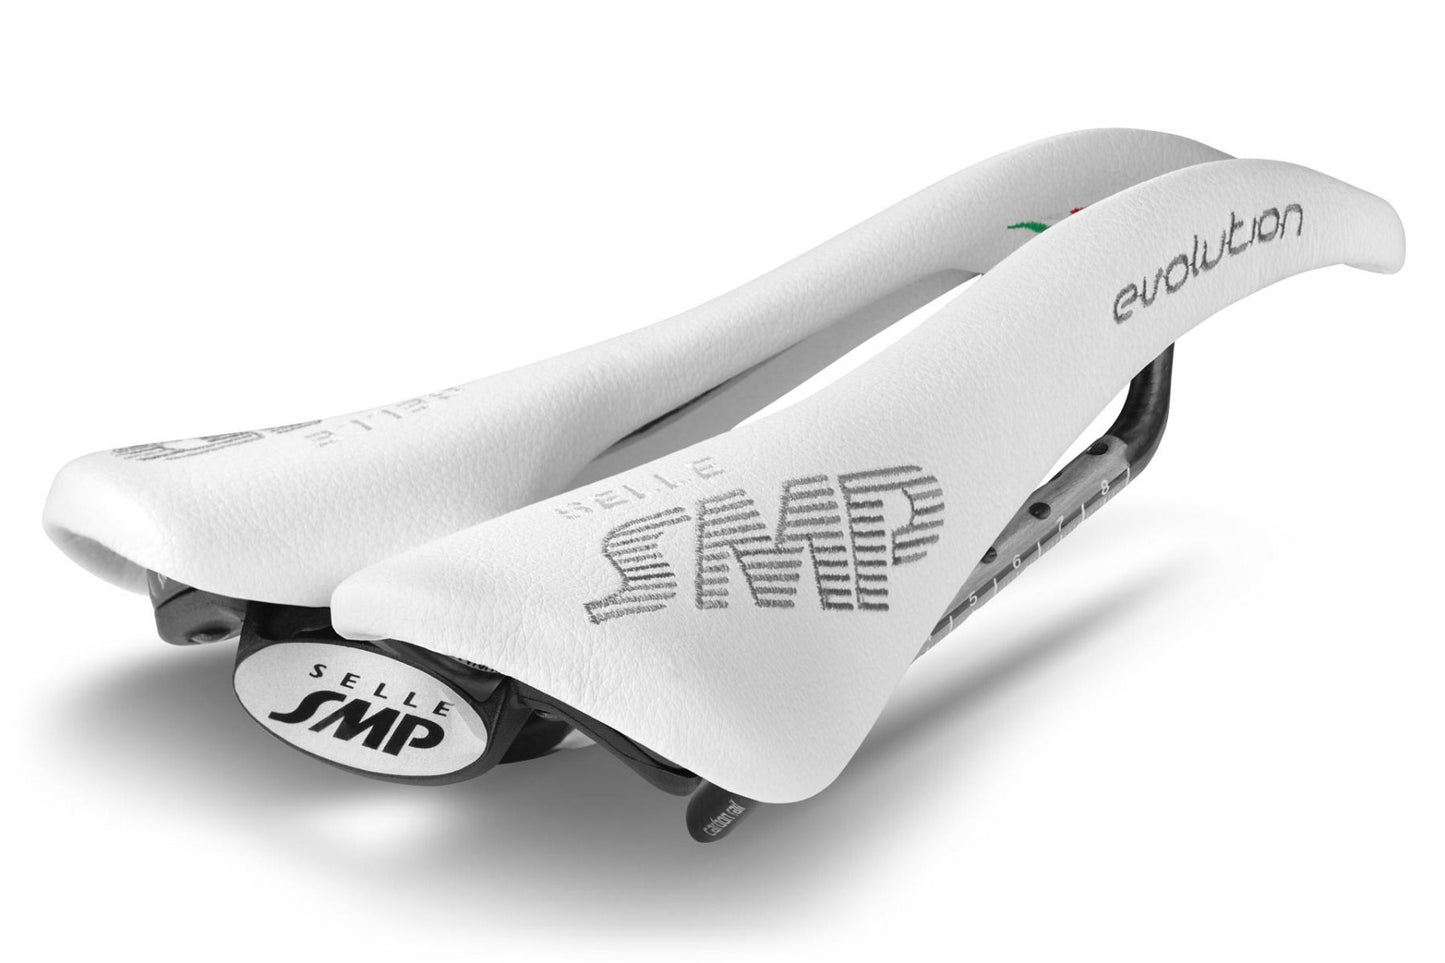 Selle SMP Evolution Saddle with Carbon Rails (White)